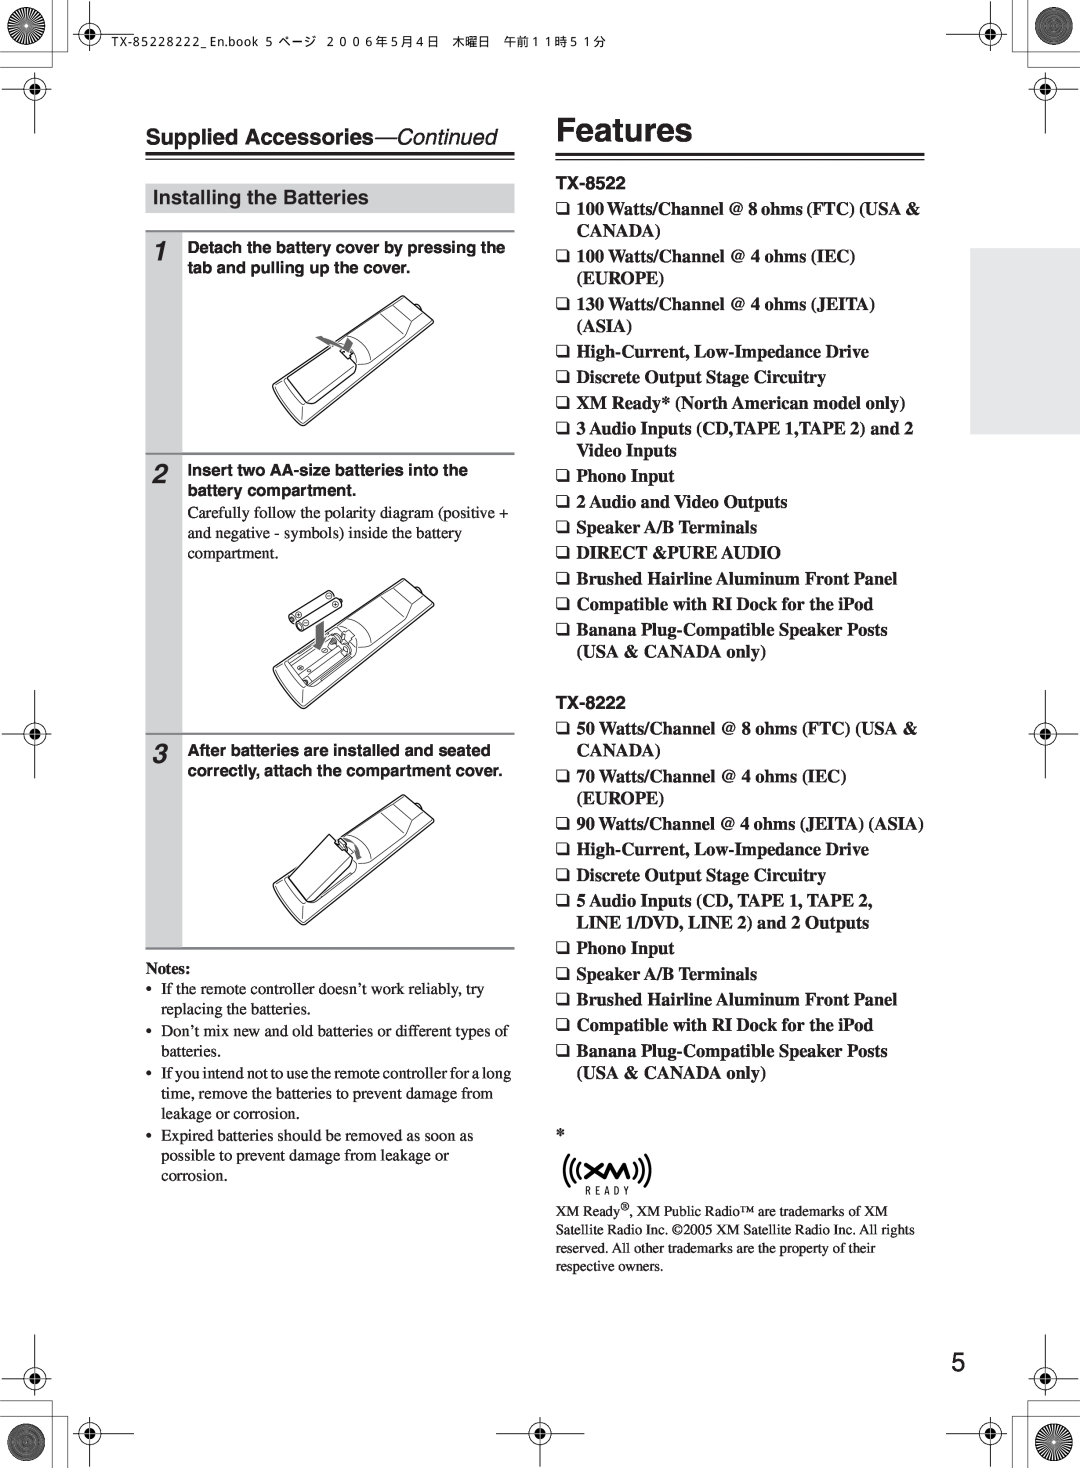 Onkyo TX-8522 instruction manual Features, Supplied Accessories-Continued, Installing the Batteries, TX-8222 